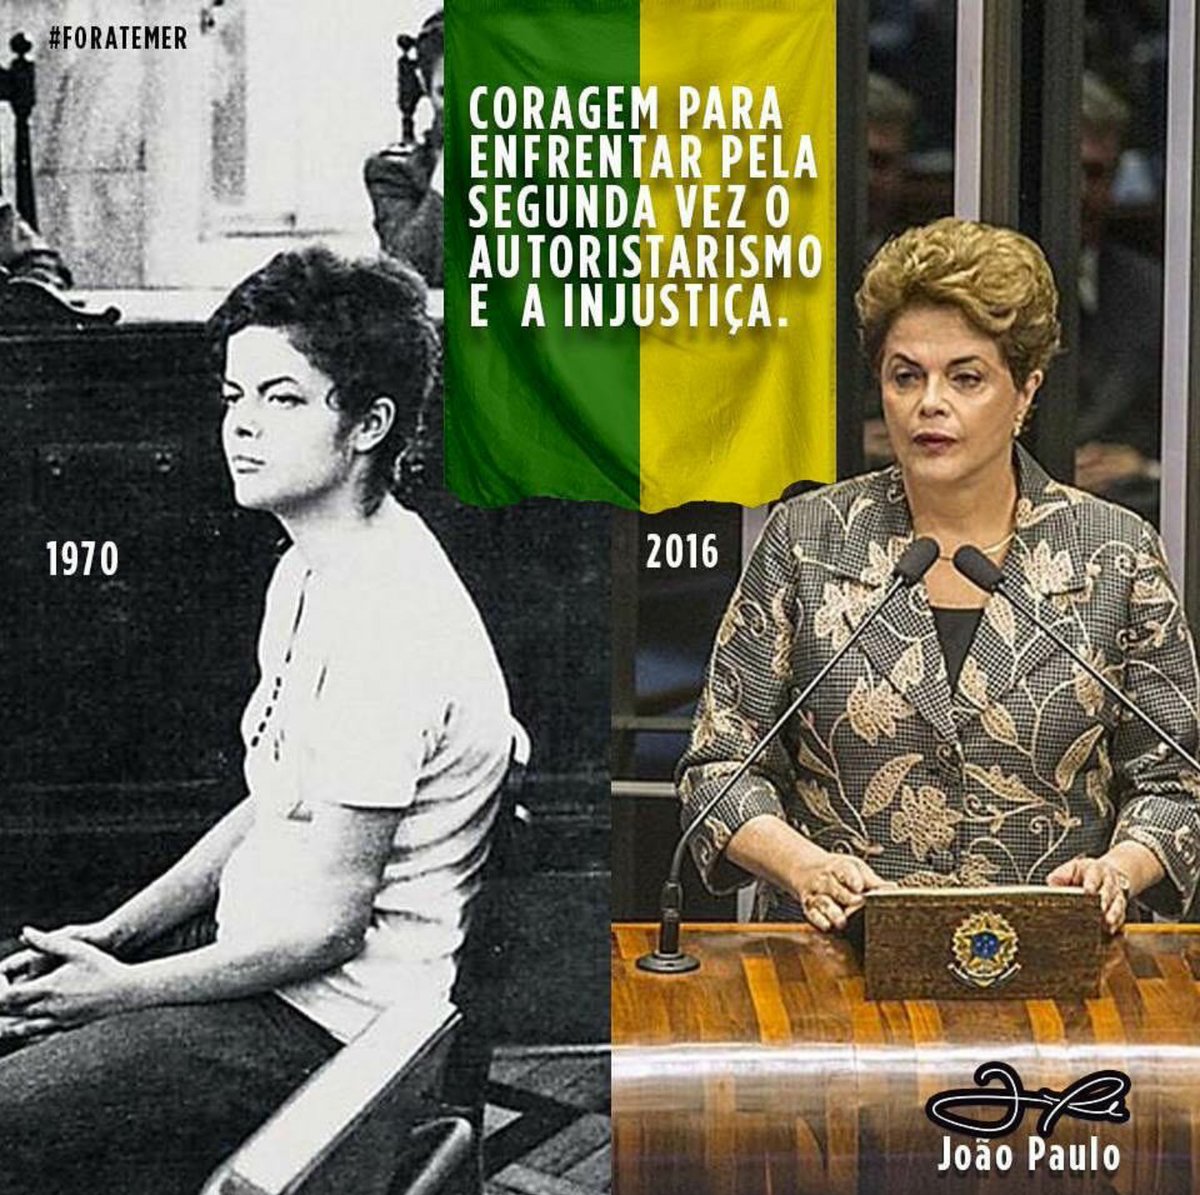 Dilma trials - 1970 and 2016